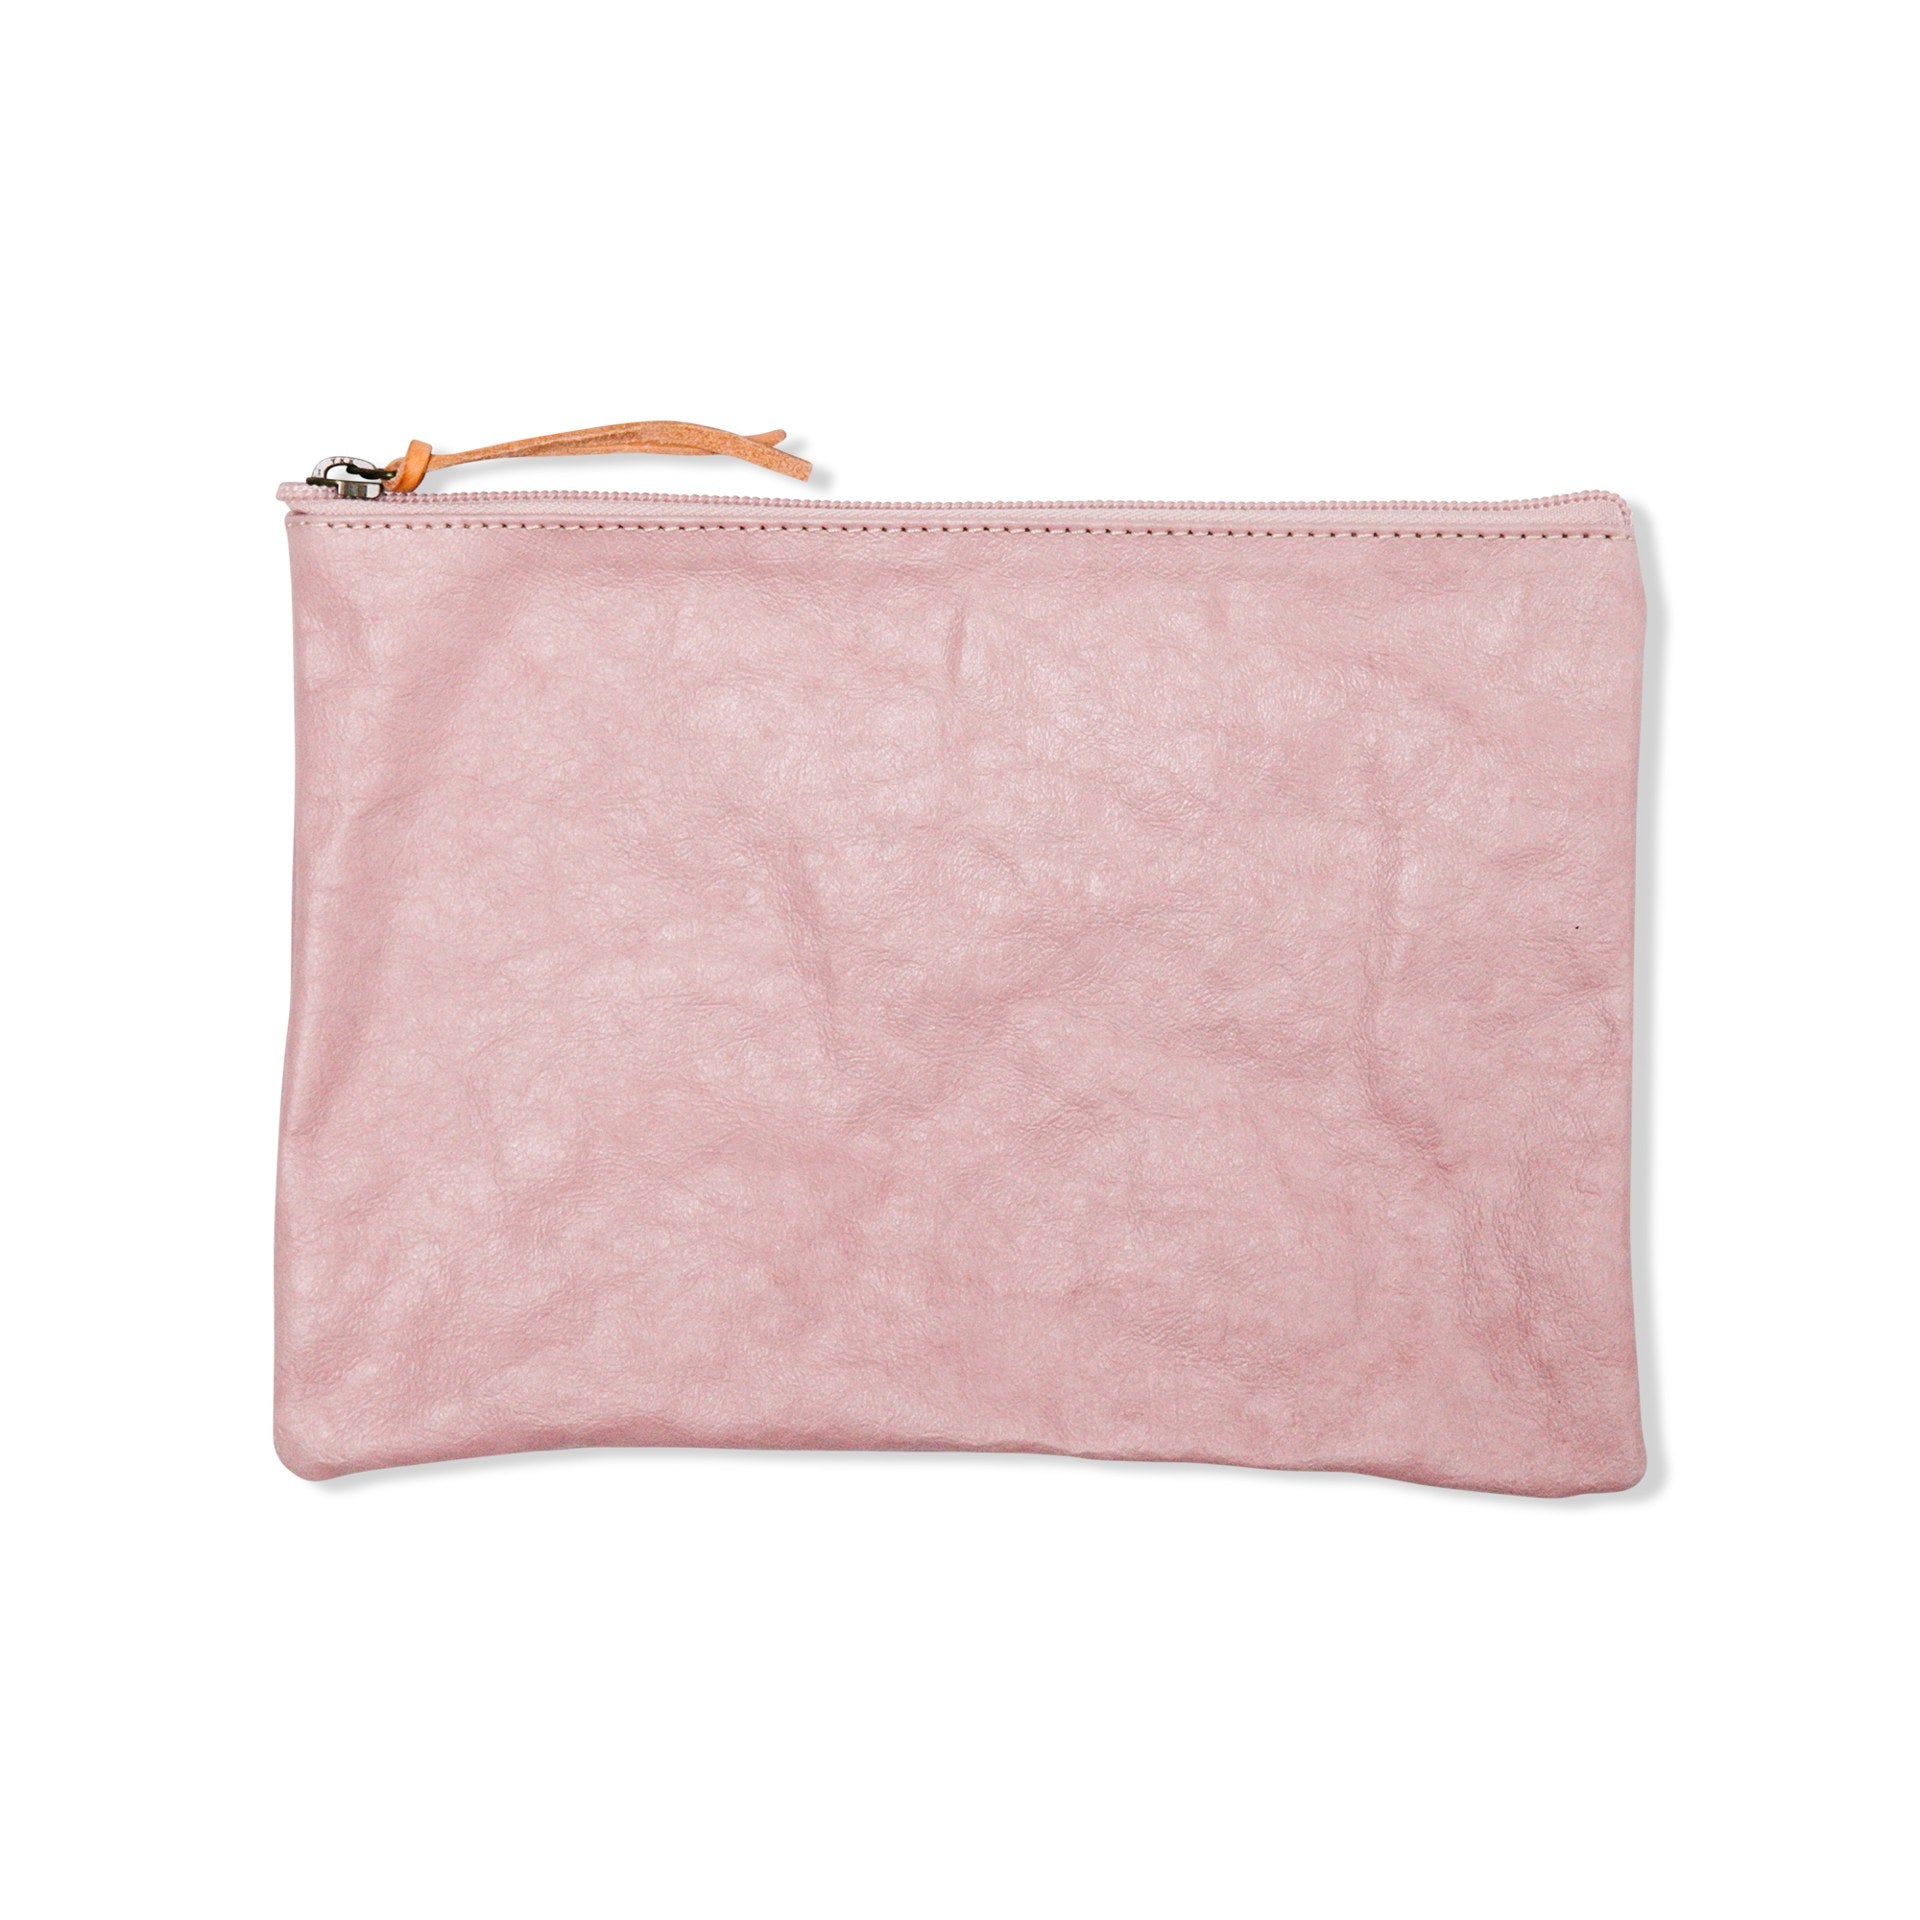 Wedding Pouch, Evening Pouch, Powder Pink Suede Envelope Pouch, Handbag  Witness Gift, Bridesmaid After the Beach - Etsy